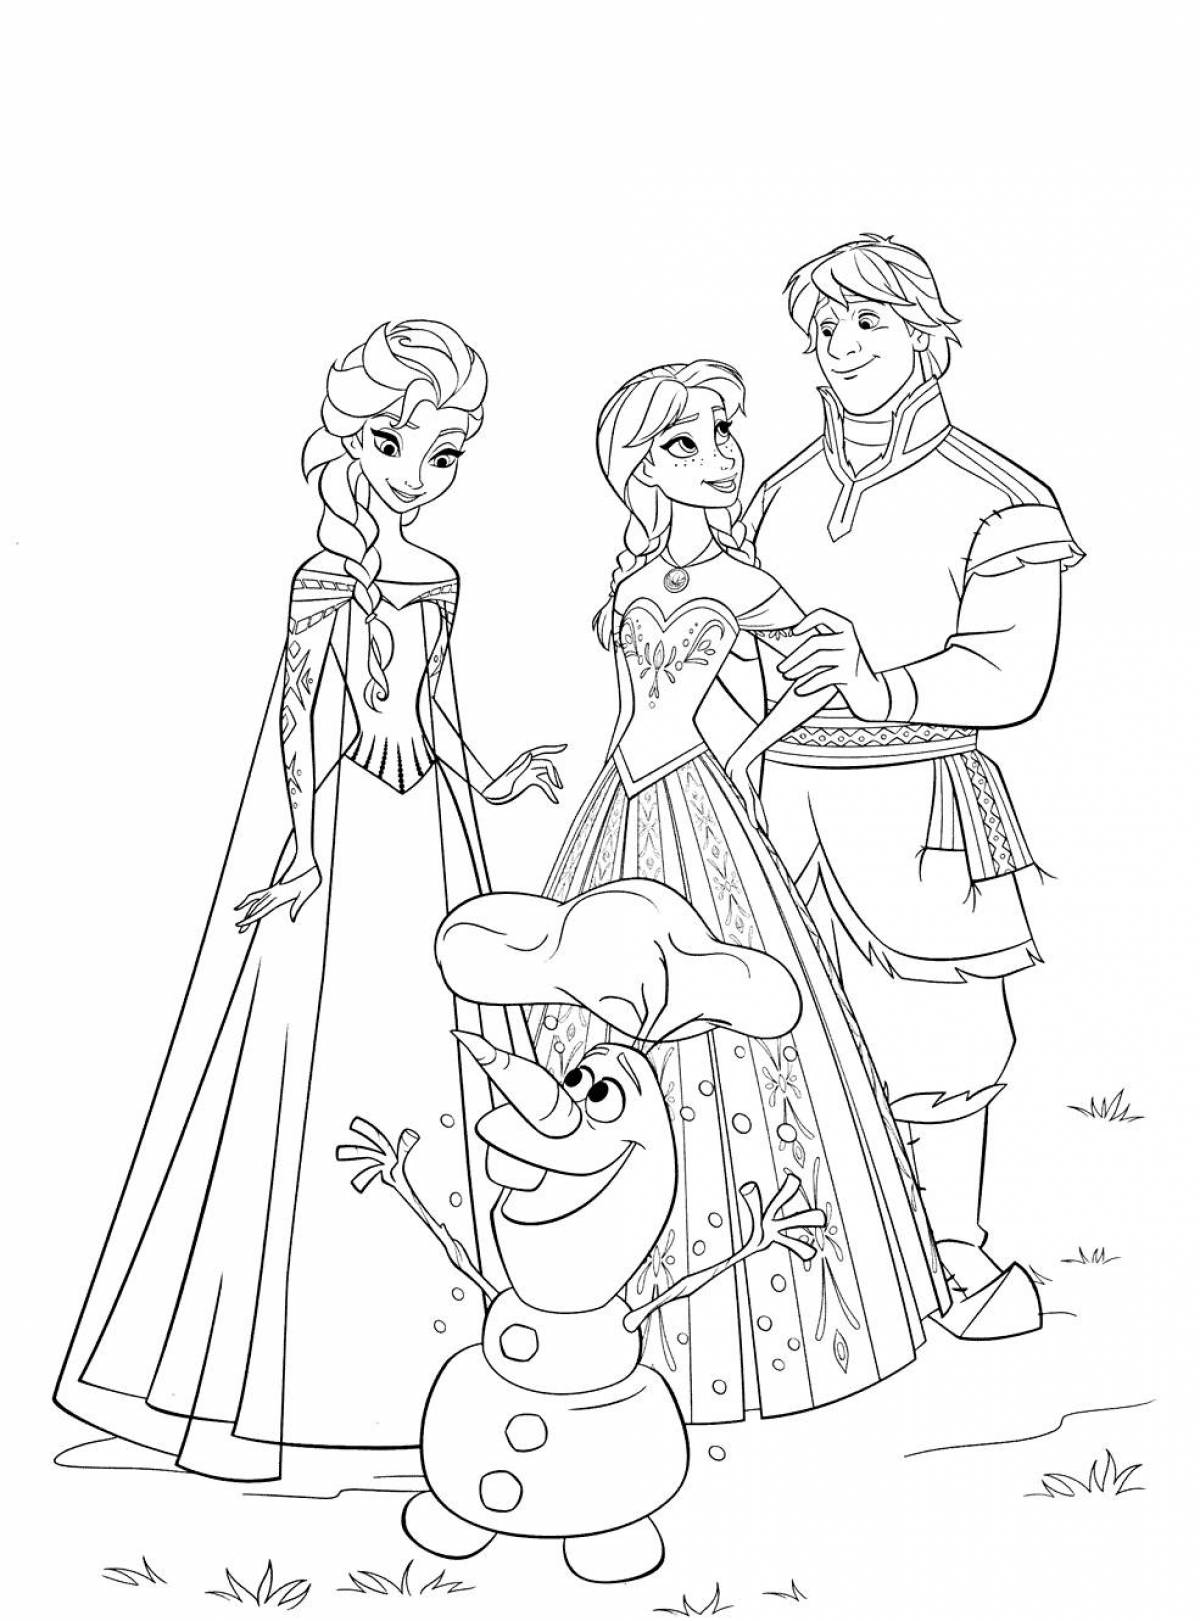 An animated coloring book